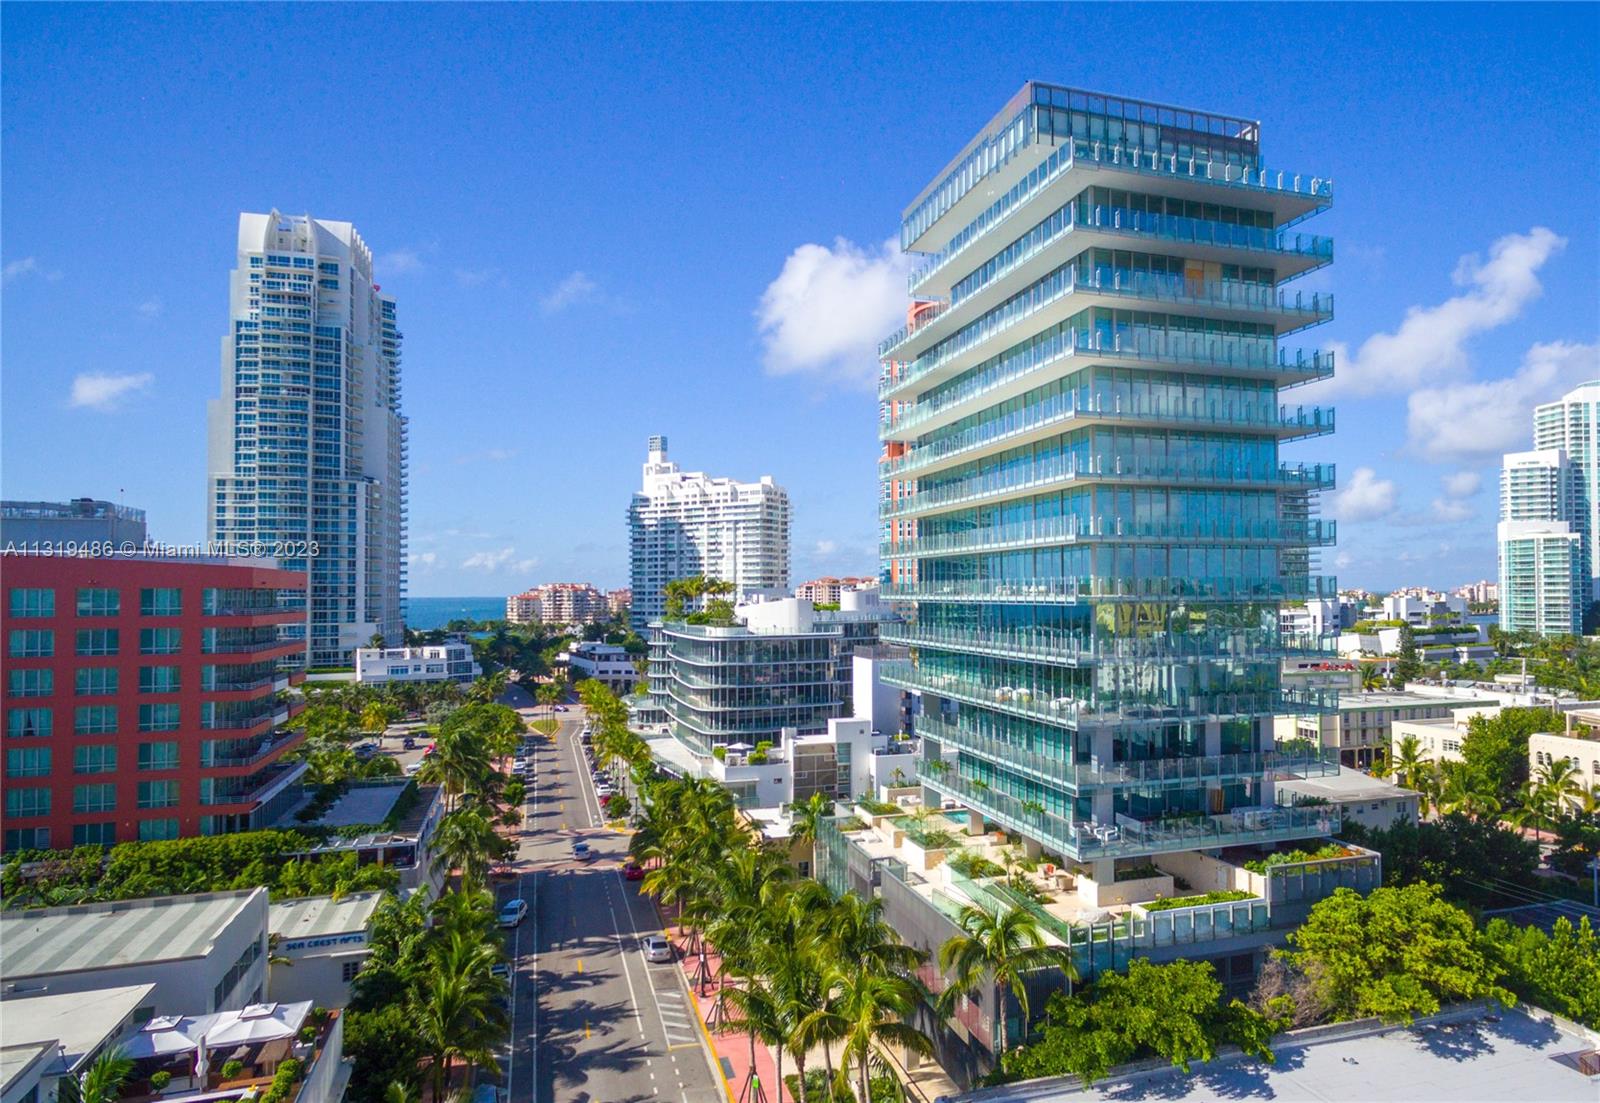 With only 10 full floor residences, GLASS at 120 OCEAN DR is true exclusive luxury living. Your own private estate manager provides single family home like living with five star hotel amenities. Designed by Rene Gonzalez, GLASS is truly one-of-a kind offering 360 degree views from each residence. This spacious 2 Bed, 2.5 Bath masterpiece has a total of 3,946 square foot of space of indoor/outdoor living. Residence features include an all Calcutta marble kitchen with Gaggenau and Sub-Zero appliances, oak wood floors with floating walls and a master bedroom made of floor to ceiling Arrabescato marble. Full beach and concierge services included. BRING ALL OFFERS!